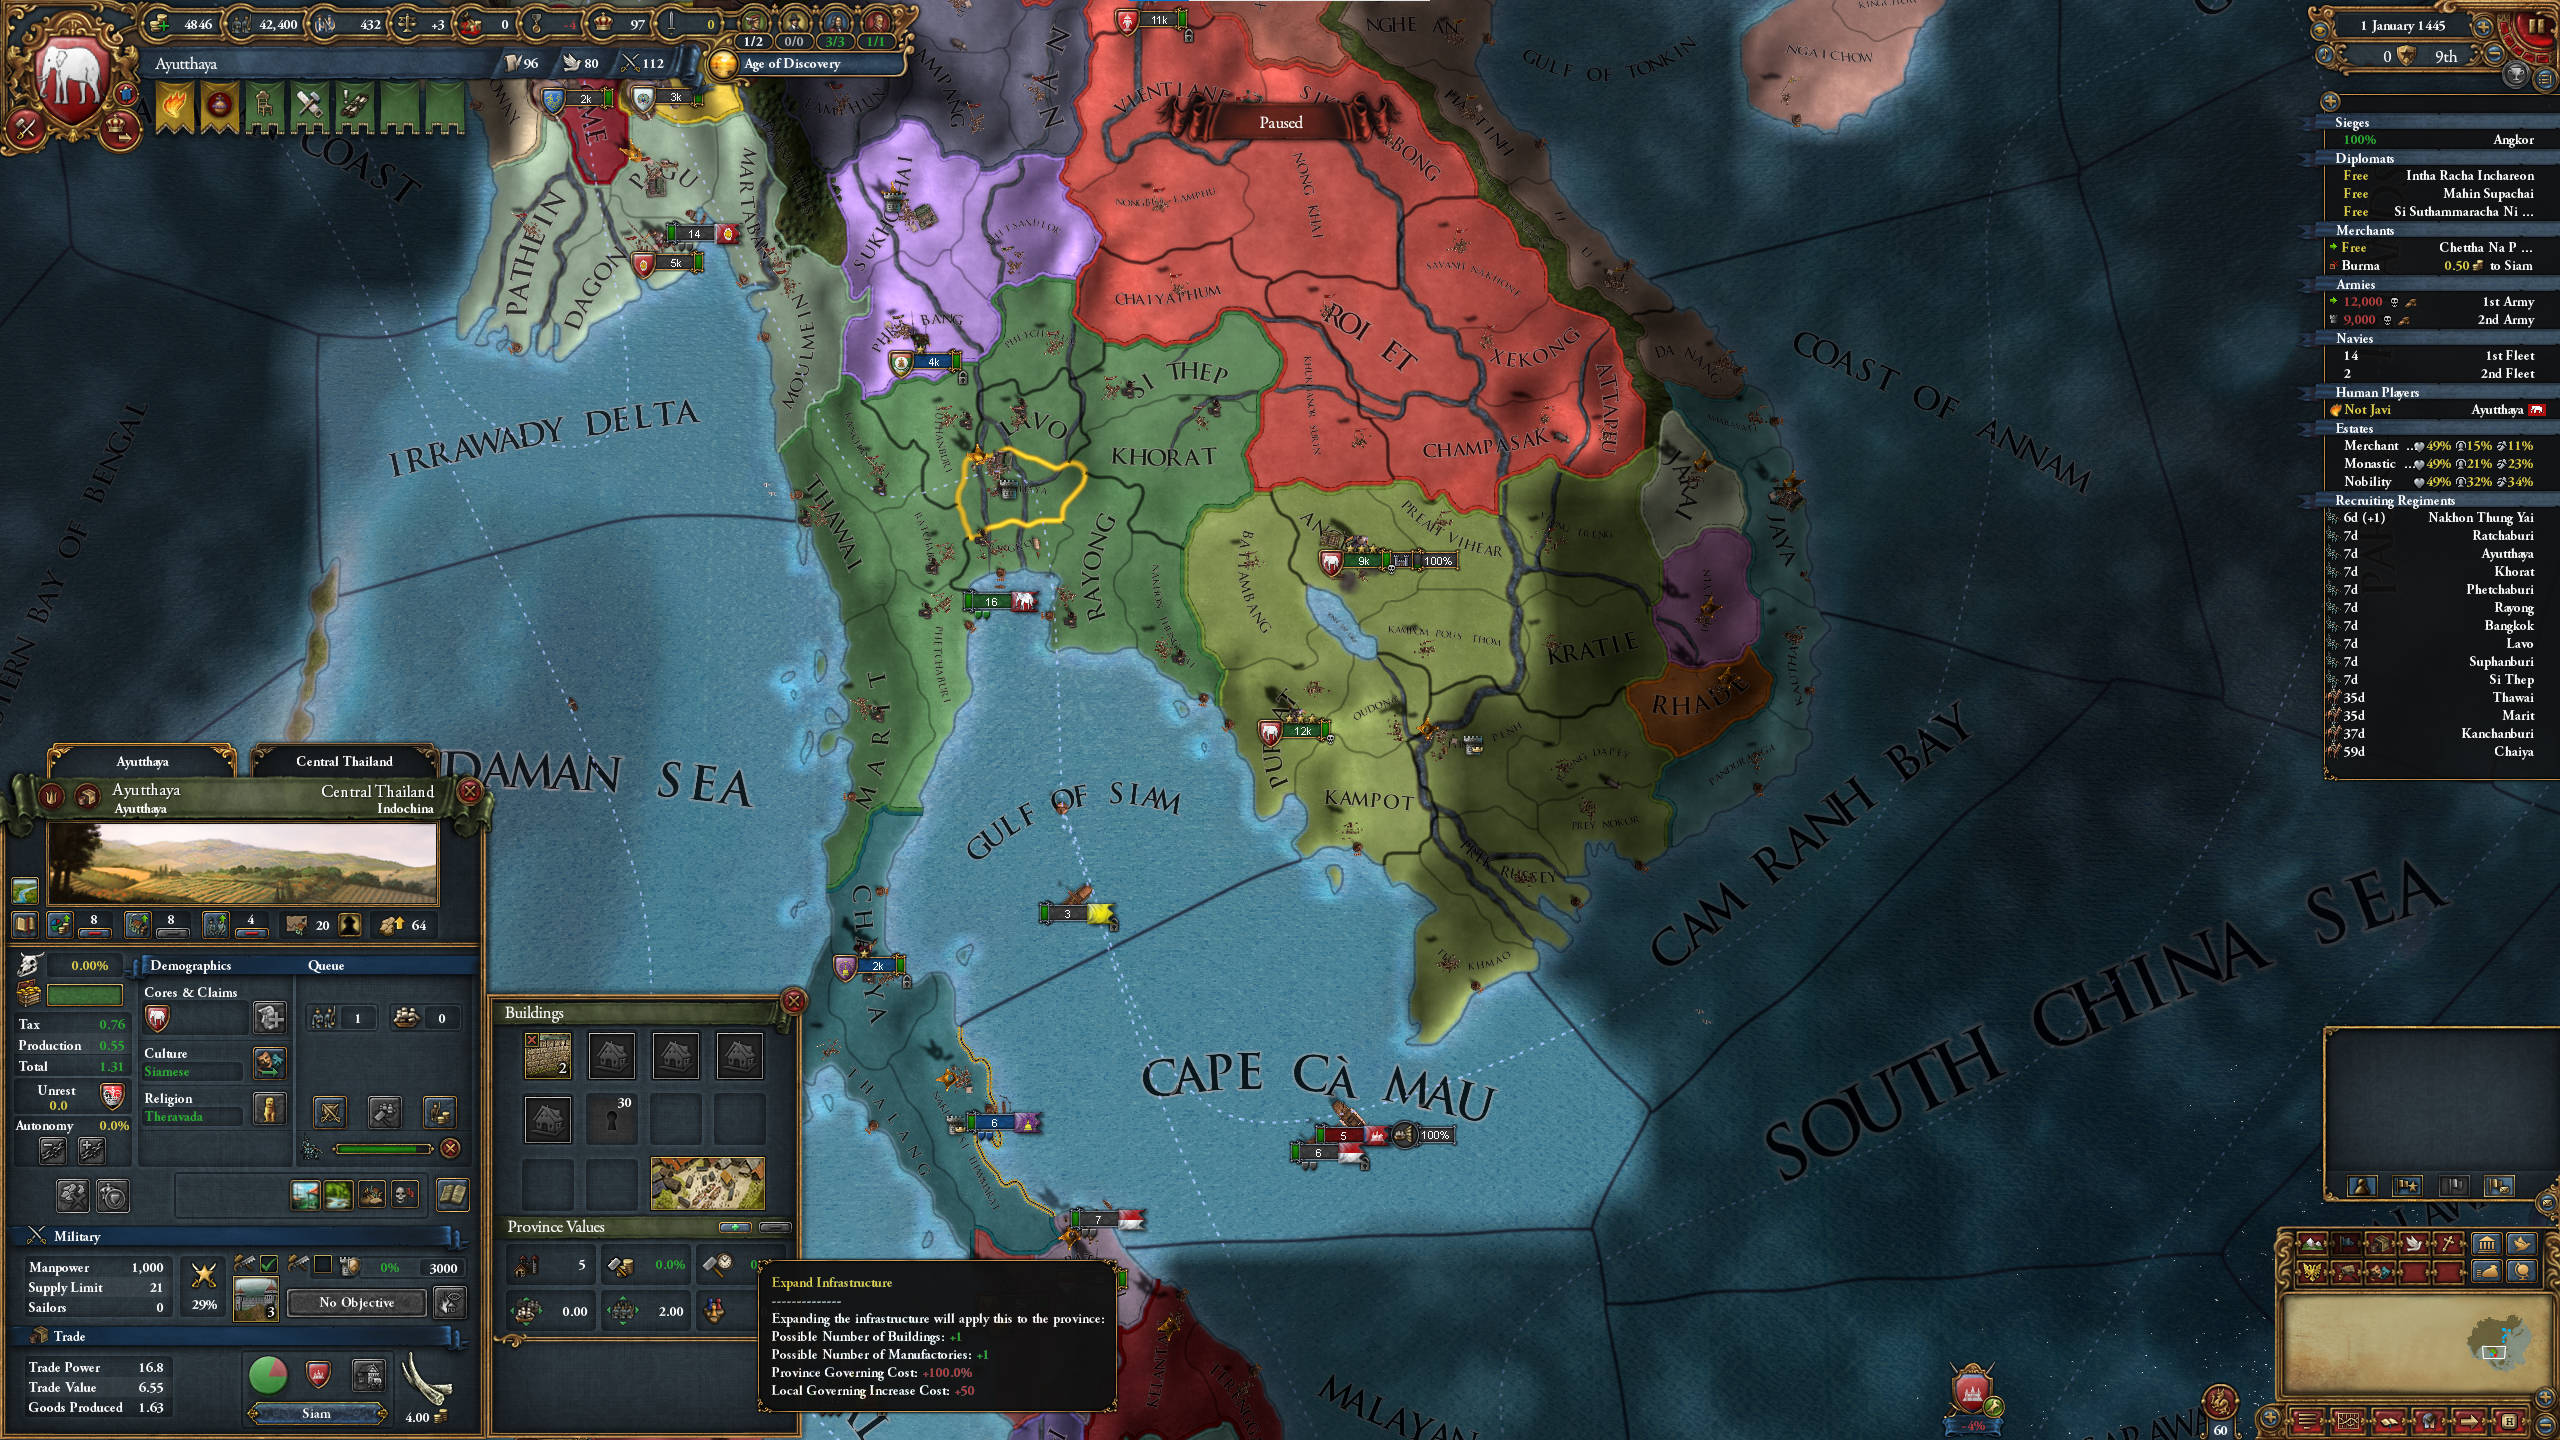 victoria-3-in-discussions-and-europa-universalis-5-coming-eventually